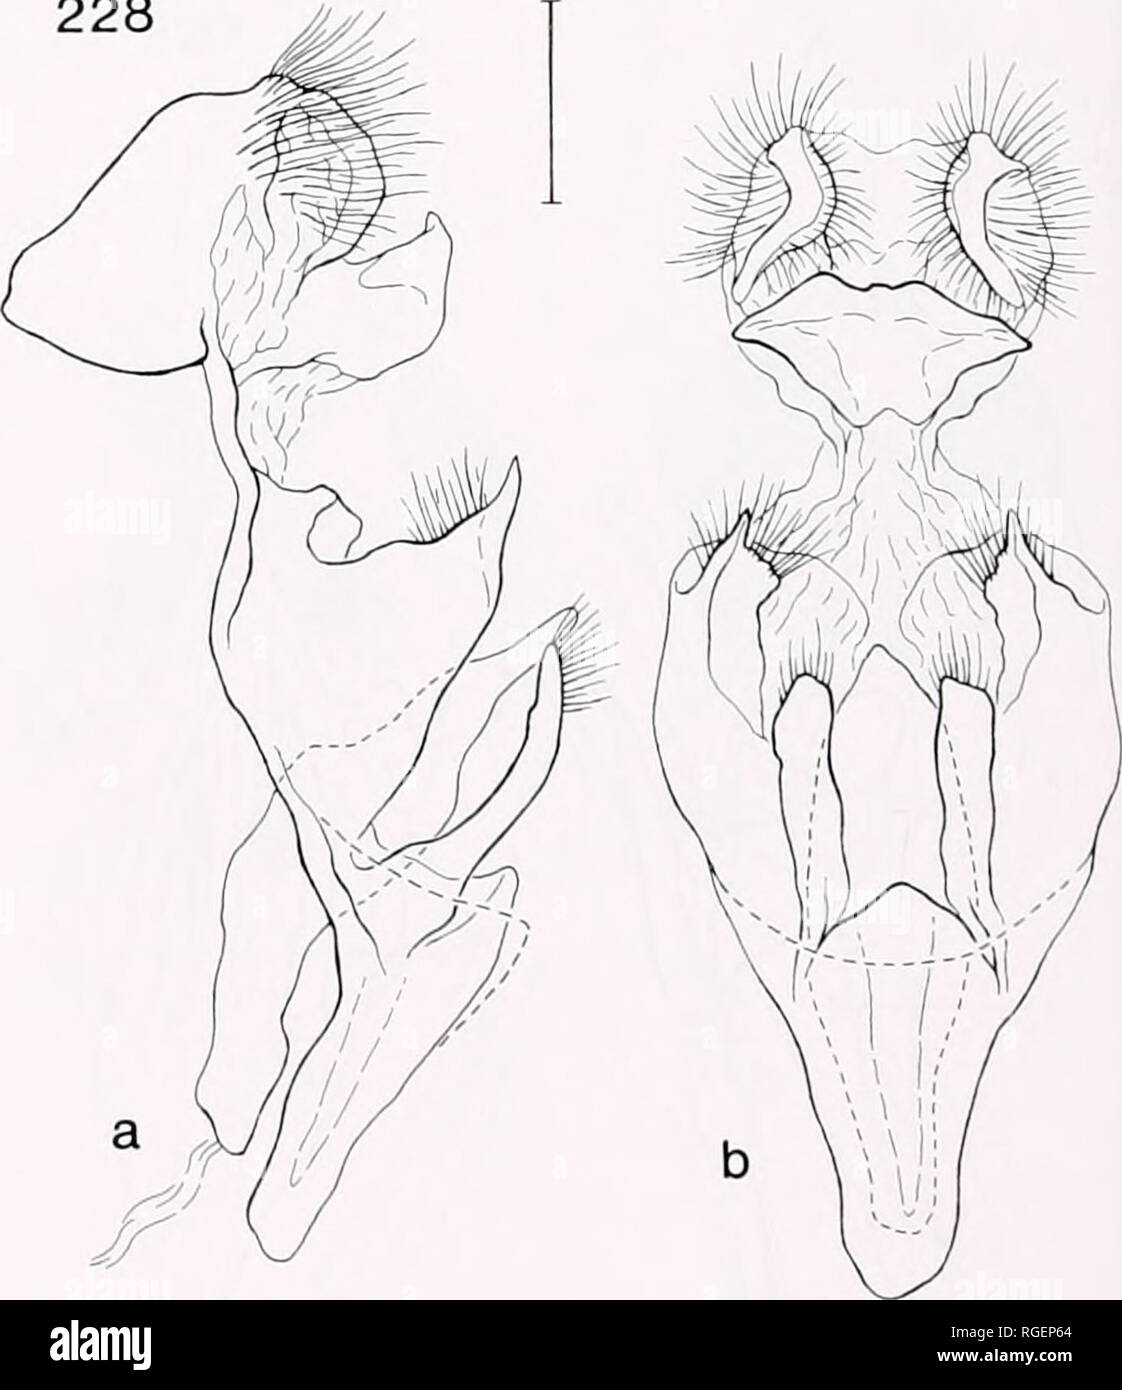 . Bulletin of the Museum of Comparative Zoology at Harvard College. Zoology. 228. Figures 225-228. Male genitalia of Minacraga, lateral (a) and ventral (b) views. Figure 225. Minacraga argentata (USNM 28097) (scale = 1 mm). Figure 226. Minacraga itatiaia (BMNH 85-48, paratype), with inset lateral oblique view of variation in external juxta (BMNH 86-29, paratype) (scale = 1 mm). Figure 227. Minacraga aenea (USNM 22564) (scale = 0.5 mm). Figure 228. Minacraga hyalina, paratype (CMNH 84-18) (scale = 0.5 mm).. Please note that these images are extracted from scanned page images that may have been  Stock Photo